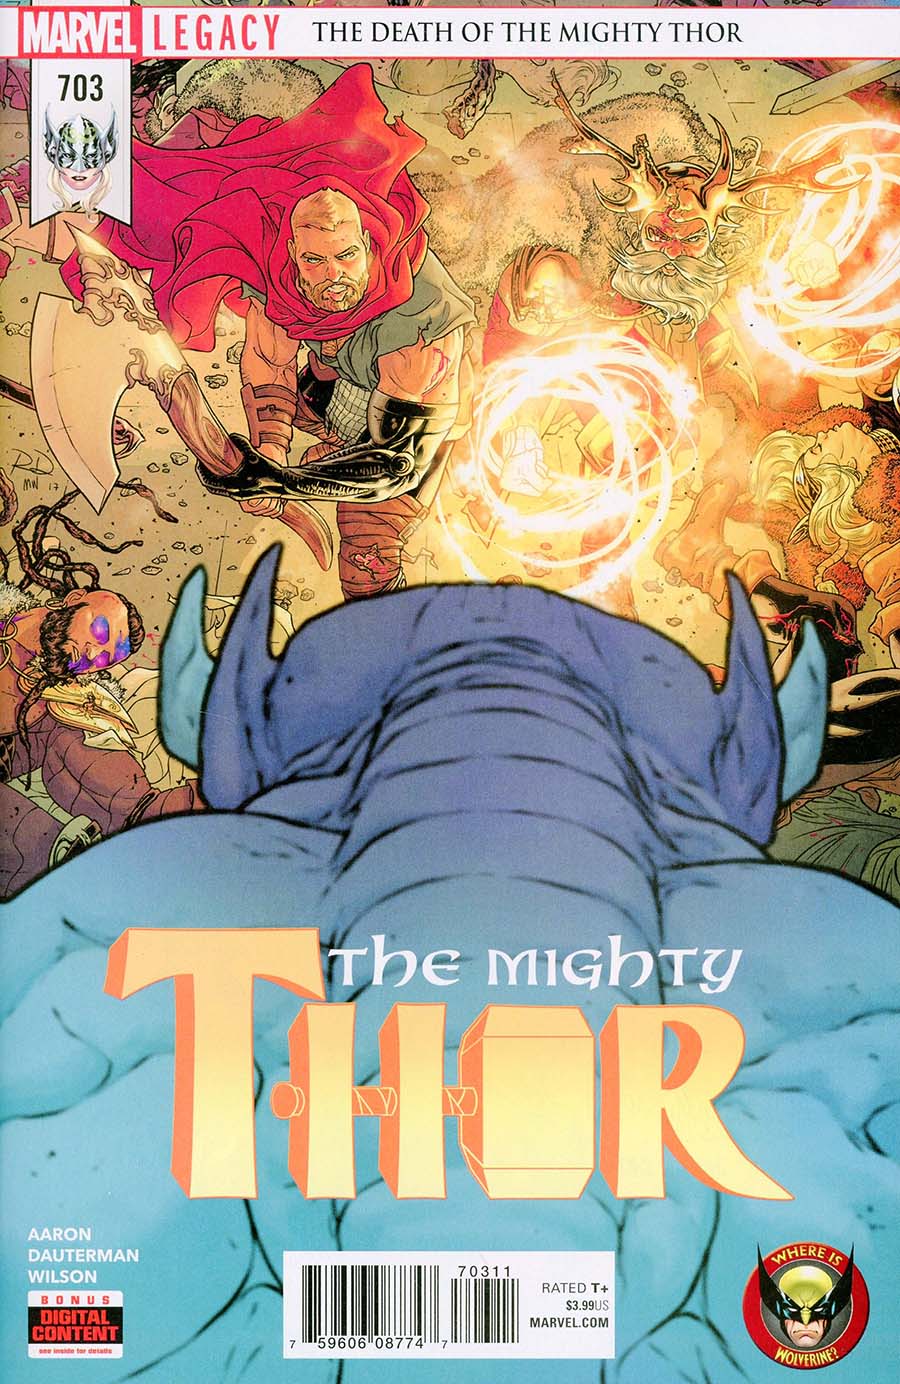 Mighty Thor Vol 2 #703 Cover A Regular Russell Dauterman Cover (Marvel Legacy Tie-In)